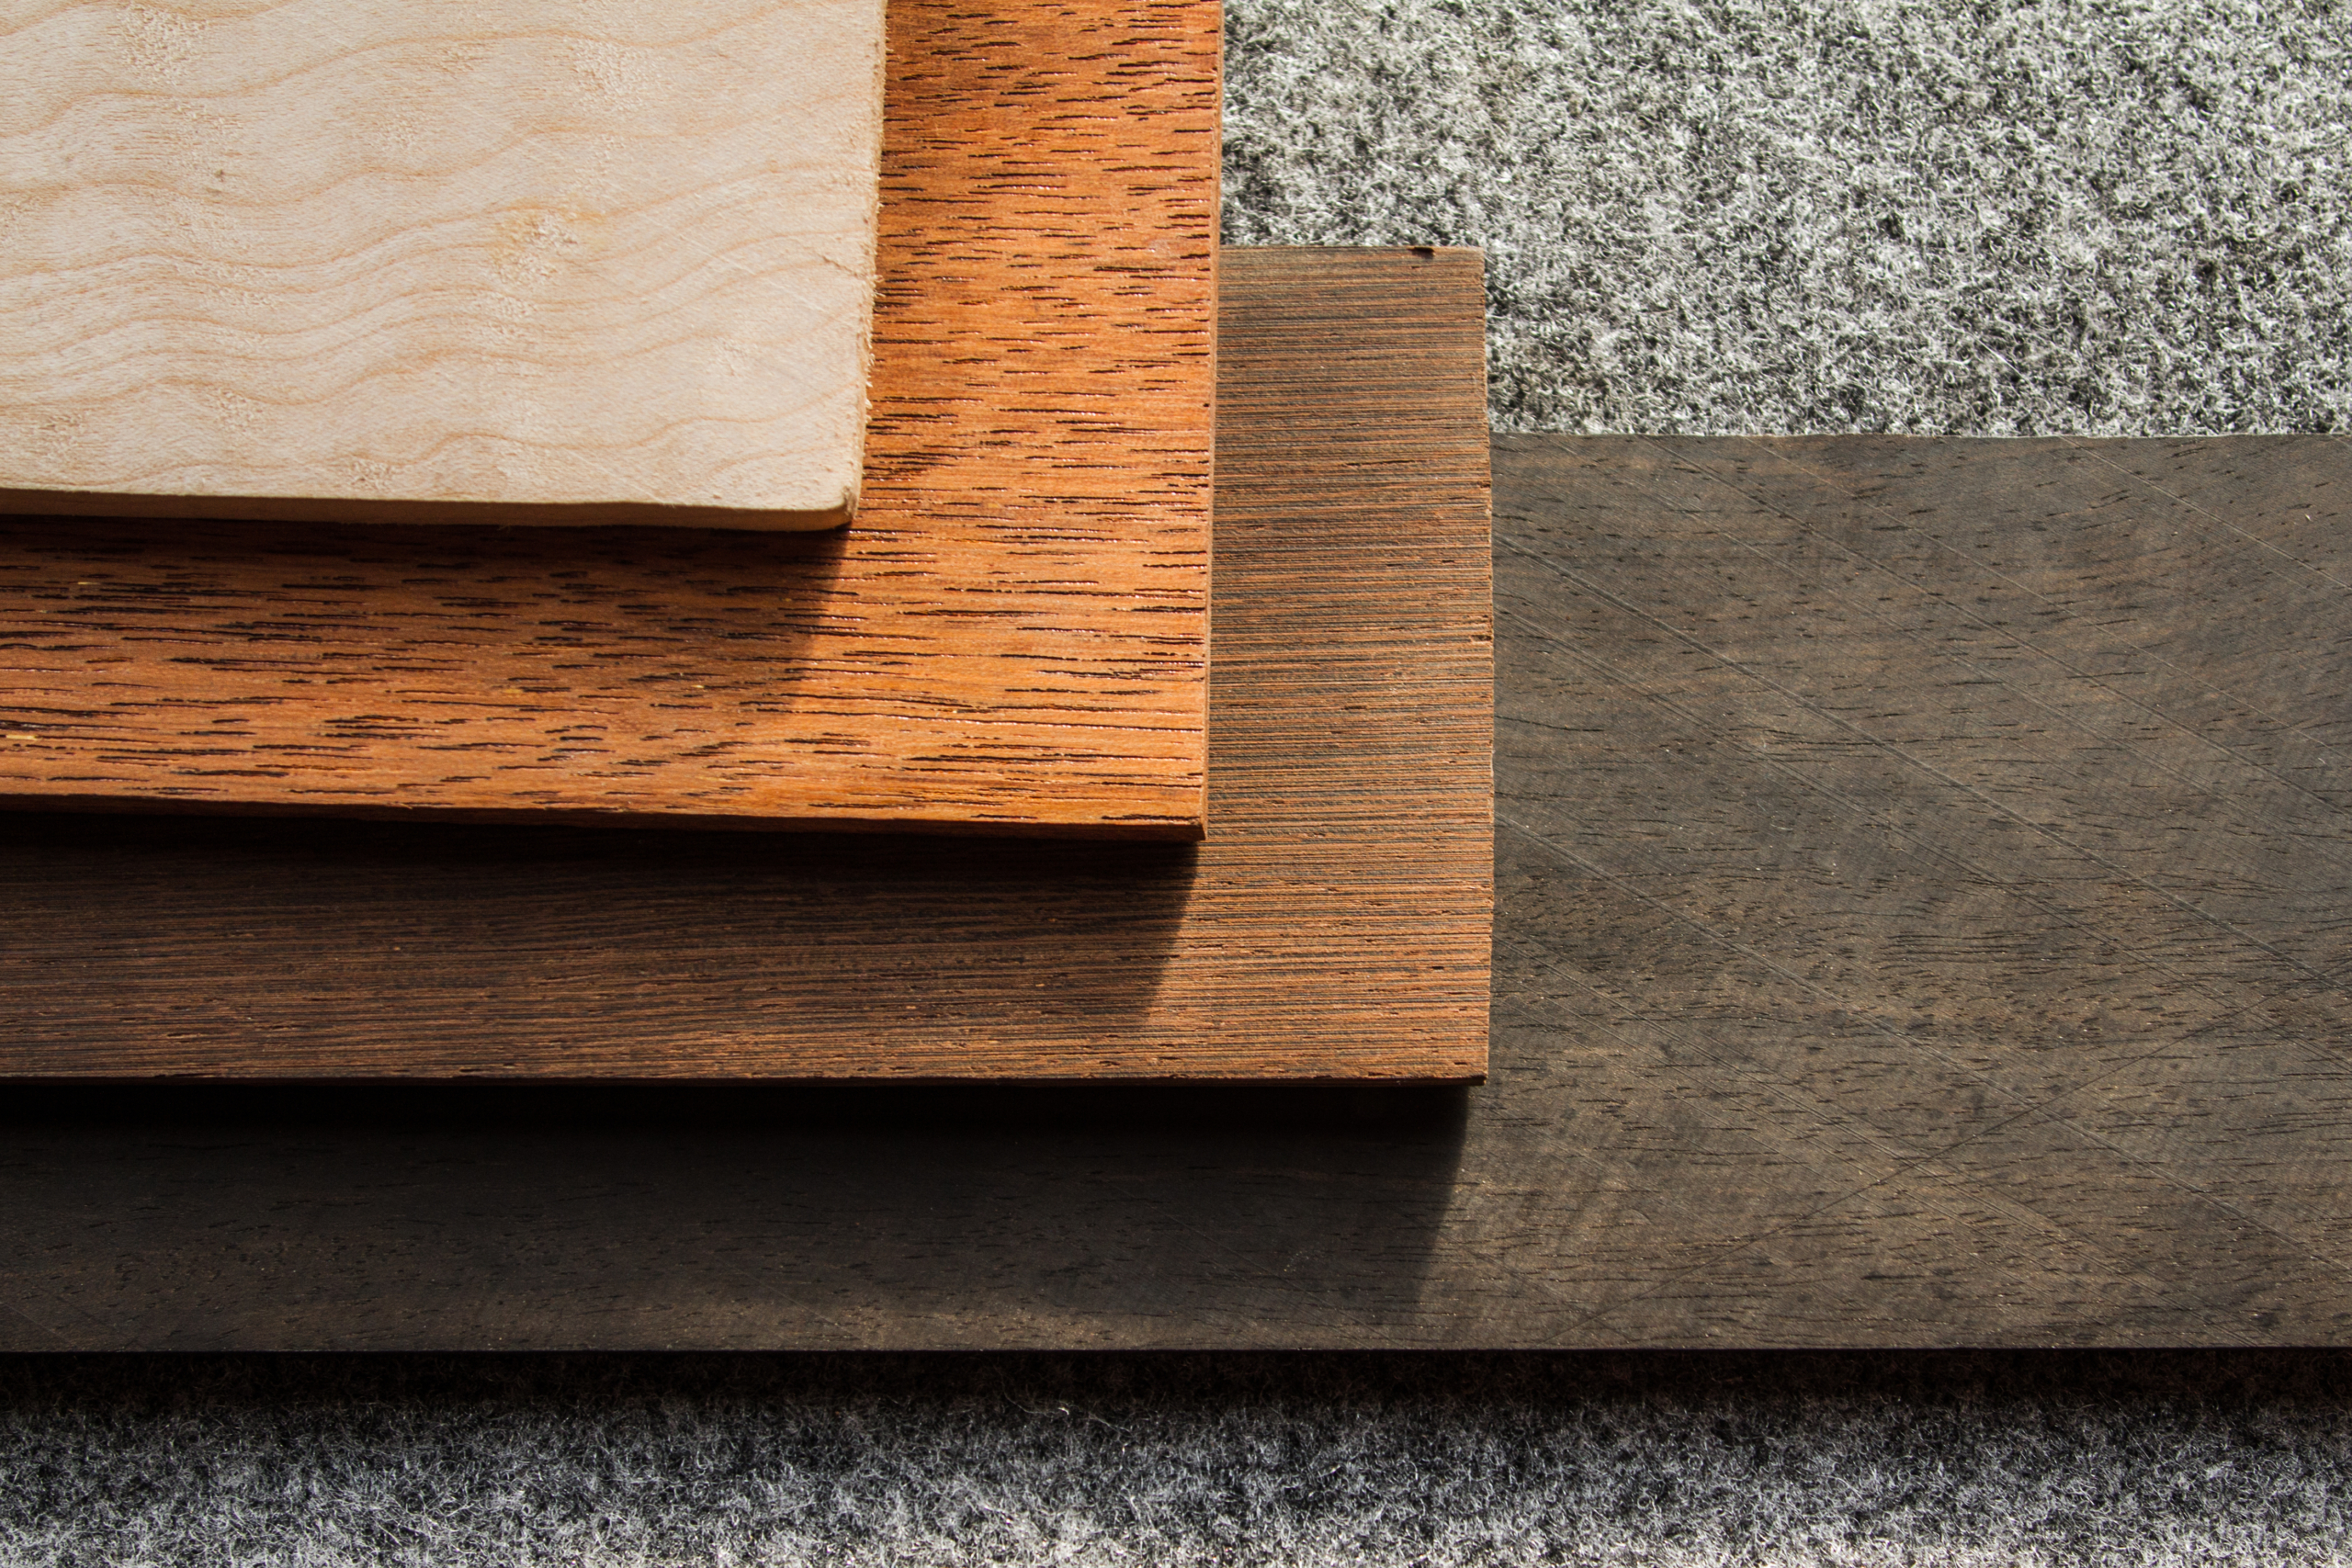 There are many wood species options to choose from, depending on which manufacturer you go with.